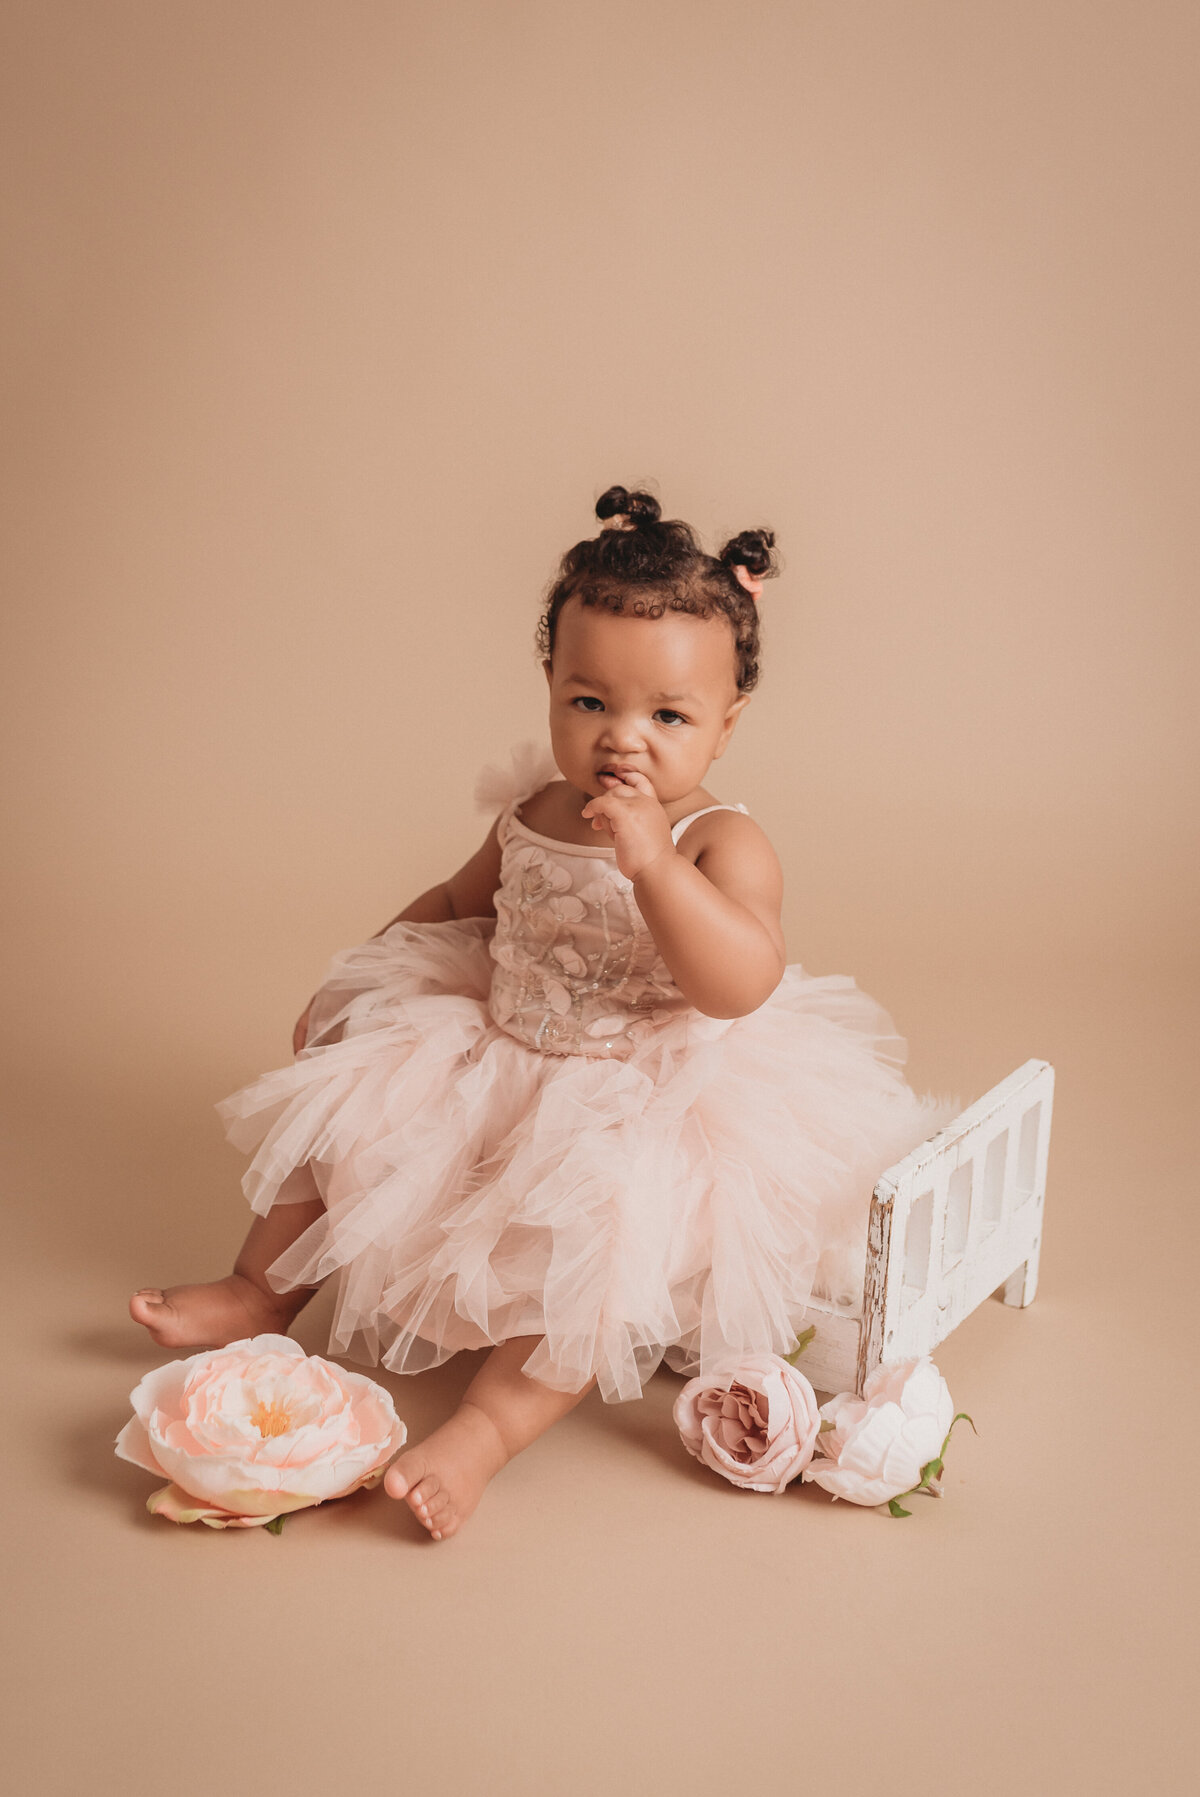 One year old baby girl in pink tulle dress sitting on miniature white bed with pink flowers around her on tan backdrop